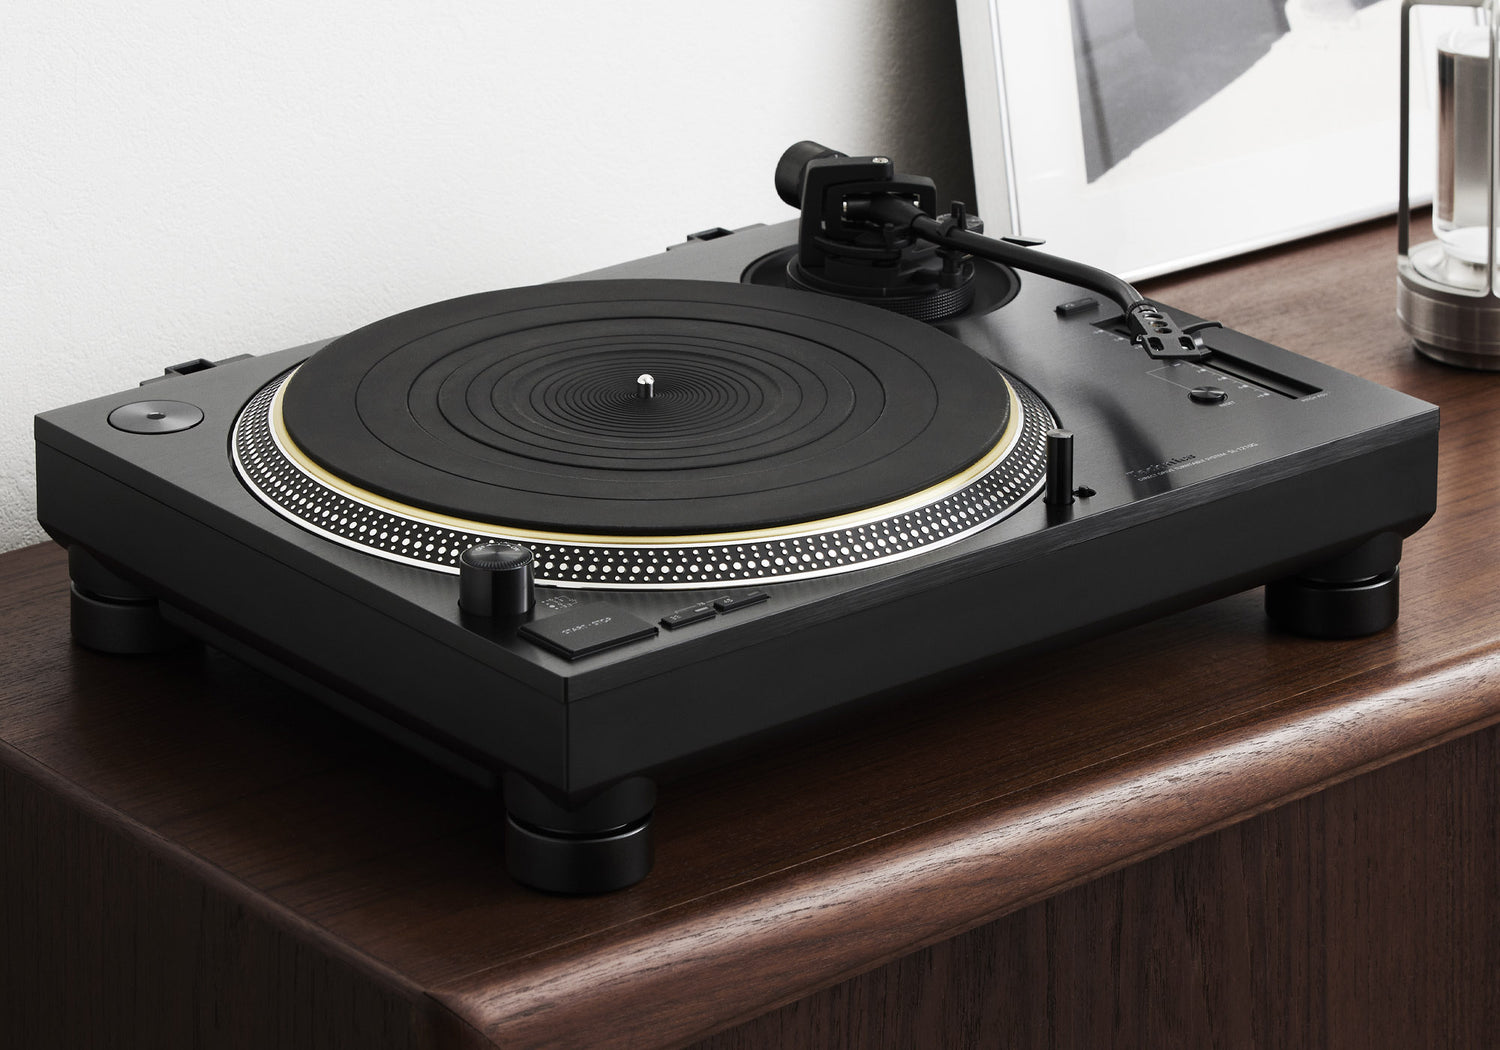 Technics Announces the SL-1210G as Black Color Version of the Highly Acclaimed SL-1200G High End Direct Drive Turntable